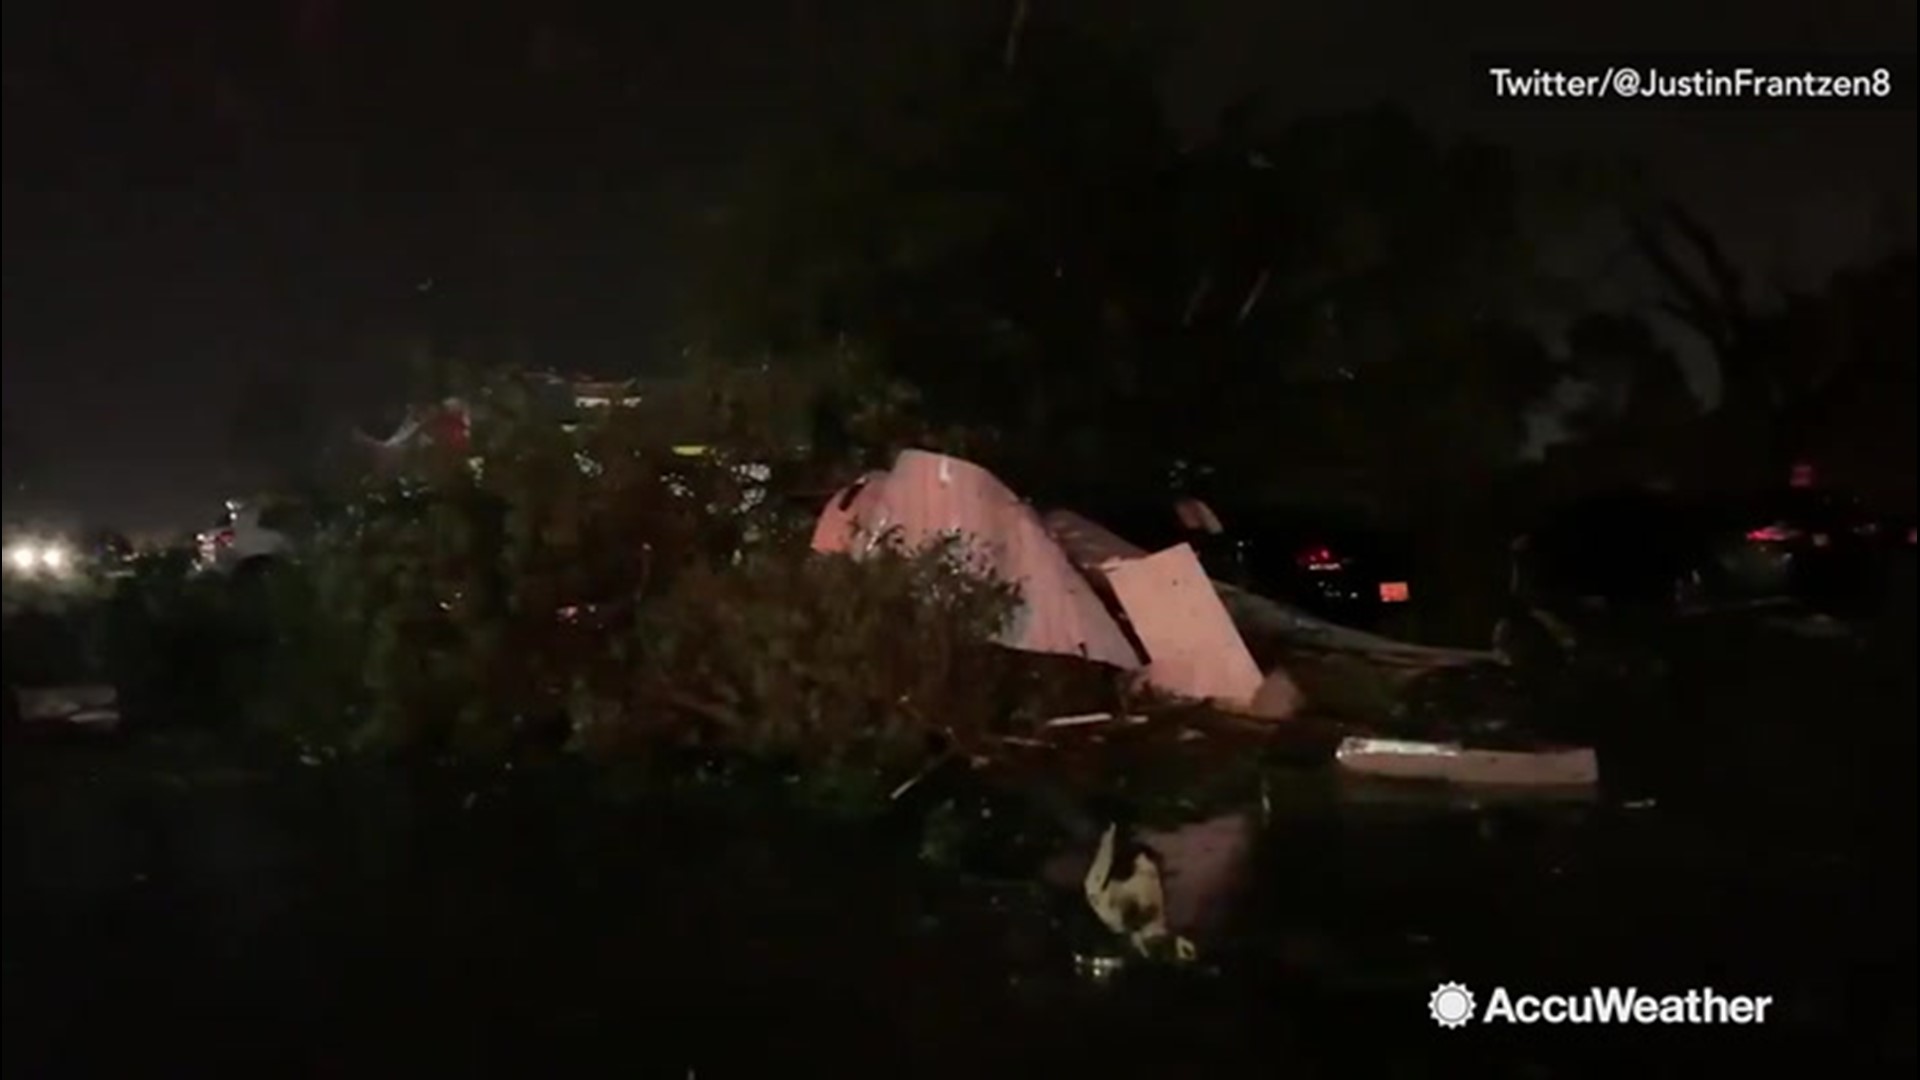 A tornado left behind a mess in Sioux Falls, South Dakota, on Sept. 10. The twister's powerful winds ripped up trees and caused significant damage to buildings. Fortunately, no injuries have been reported.